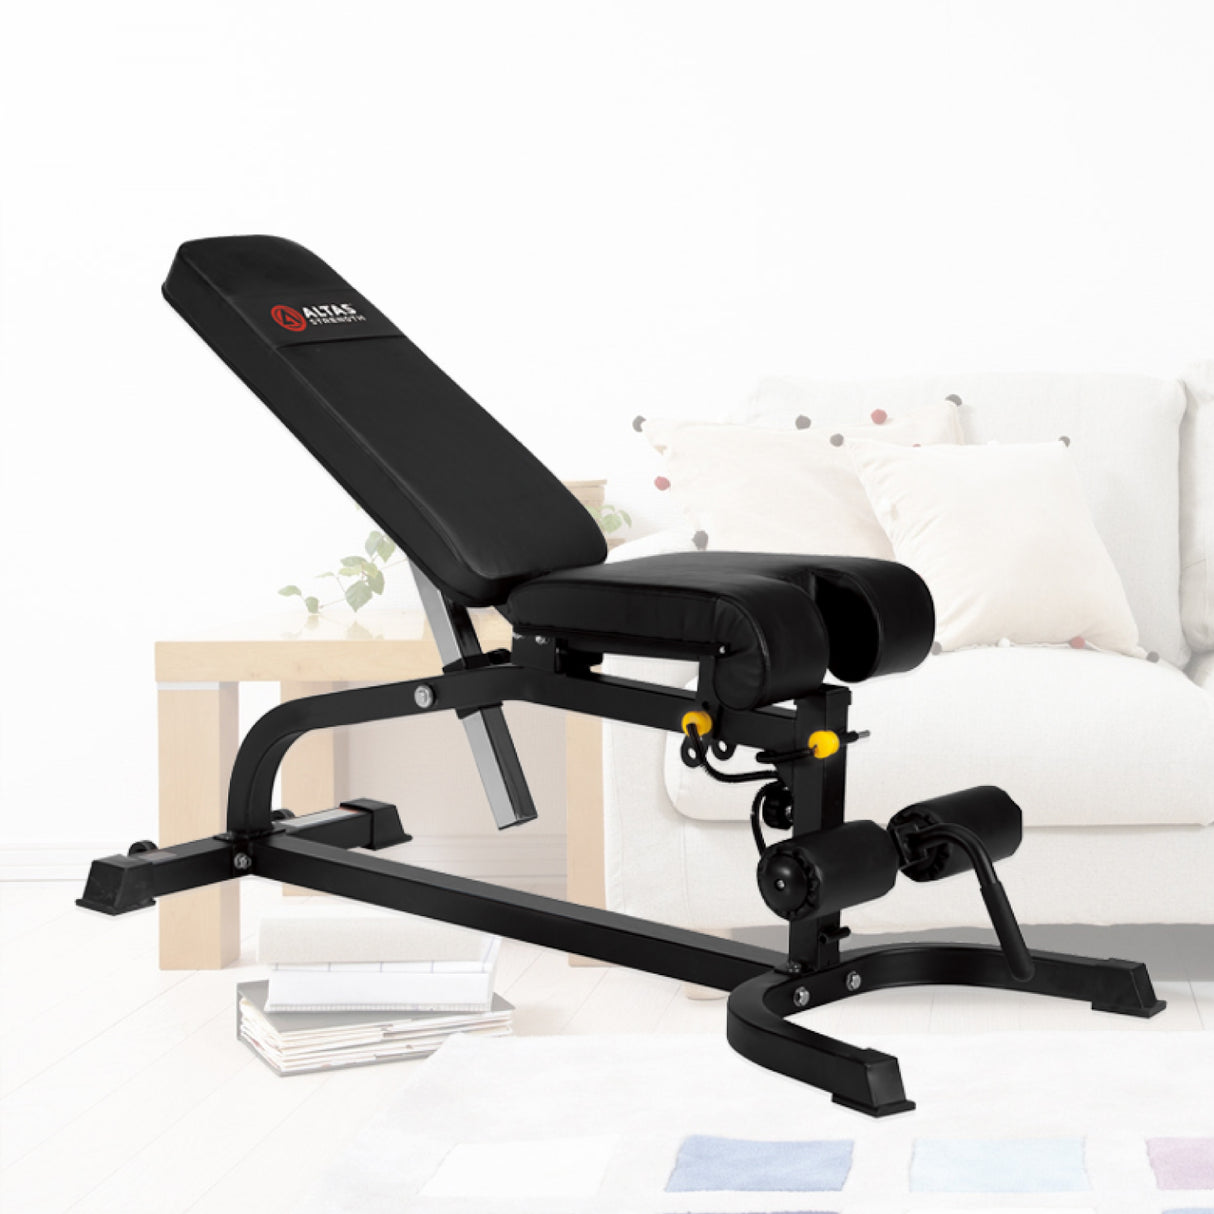 <tc>Al-3018 weight bench with leg curl, leg extension and preacher curl attachment</tc>